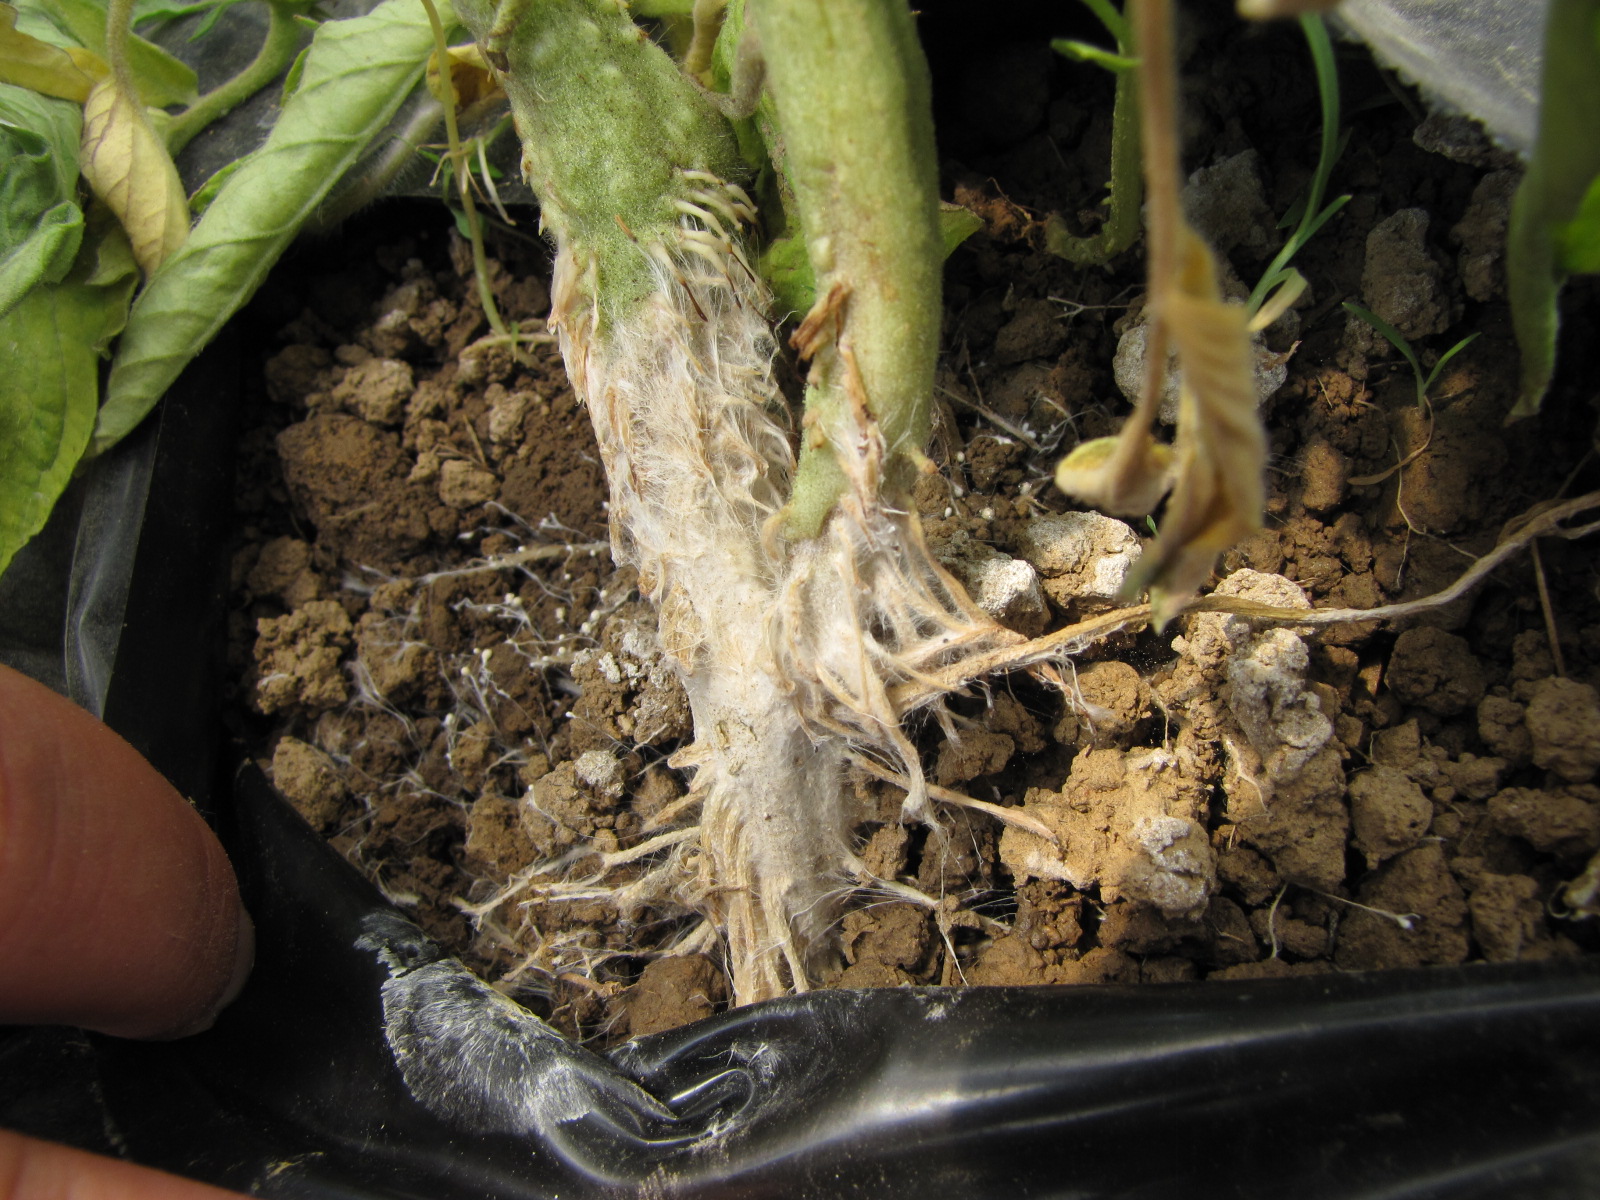 Figure 4. Base of plant with southern blight of tomato. Note sclerotia.